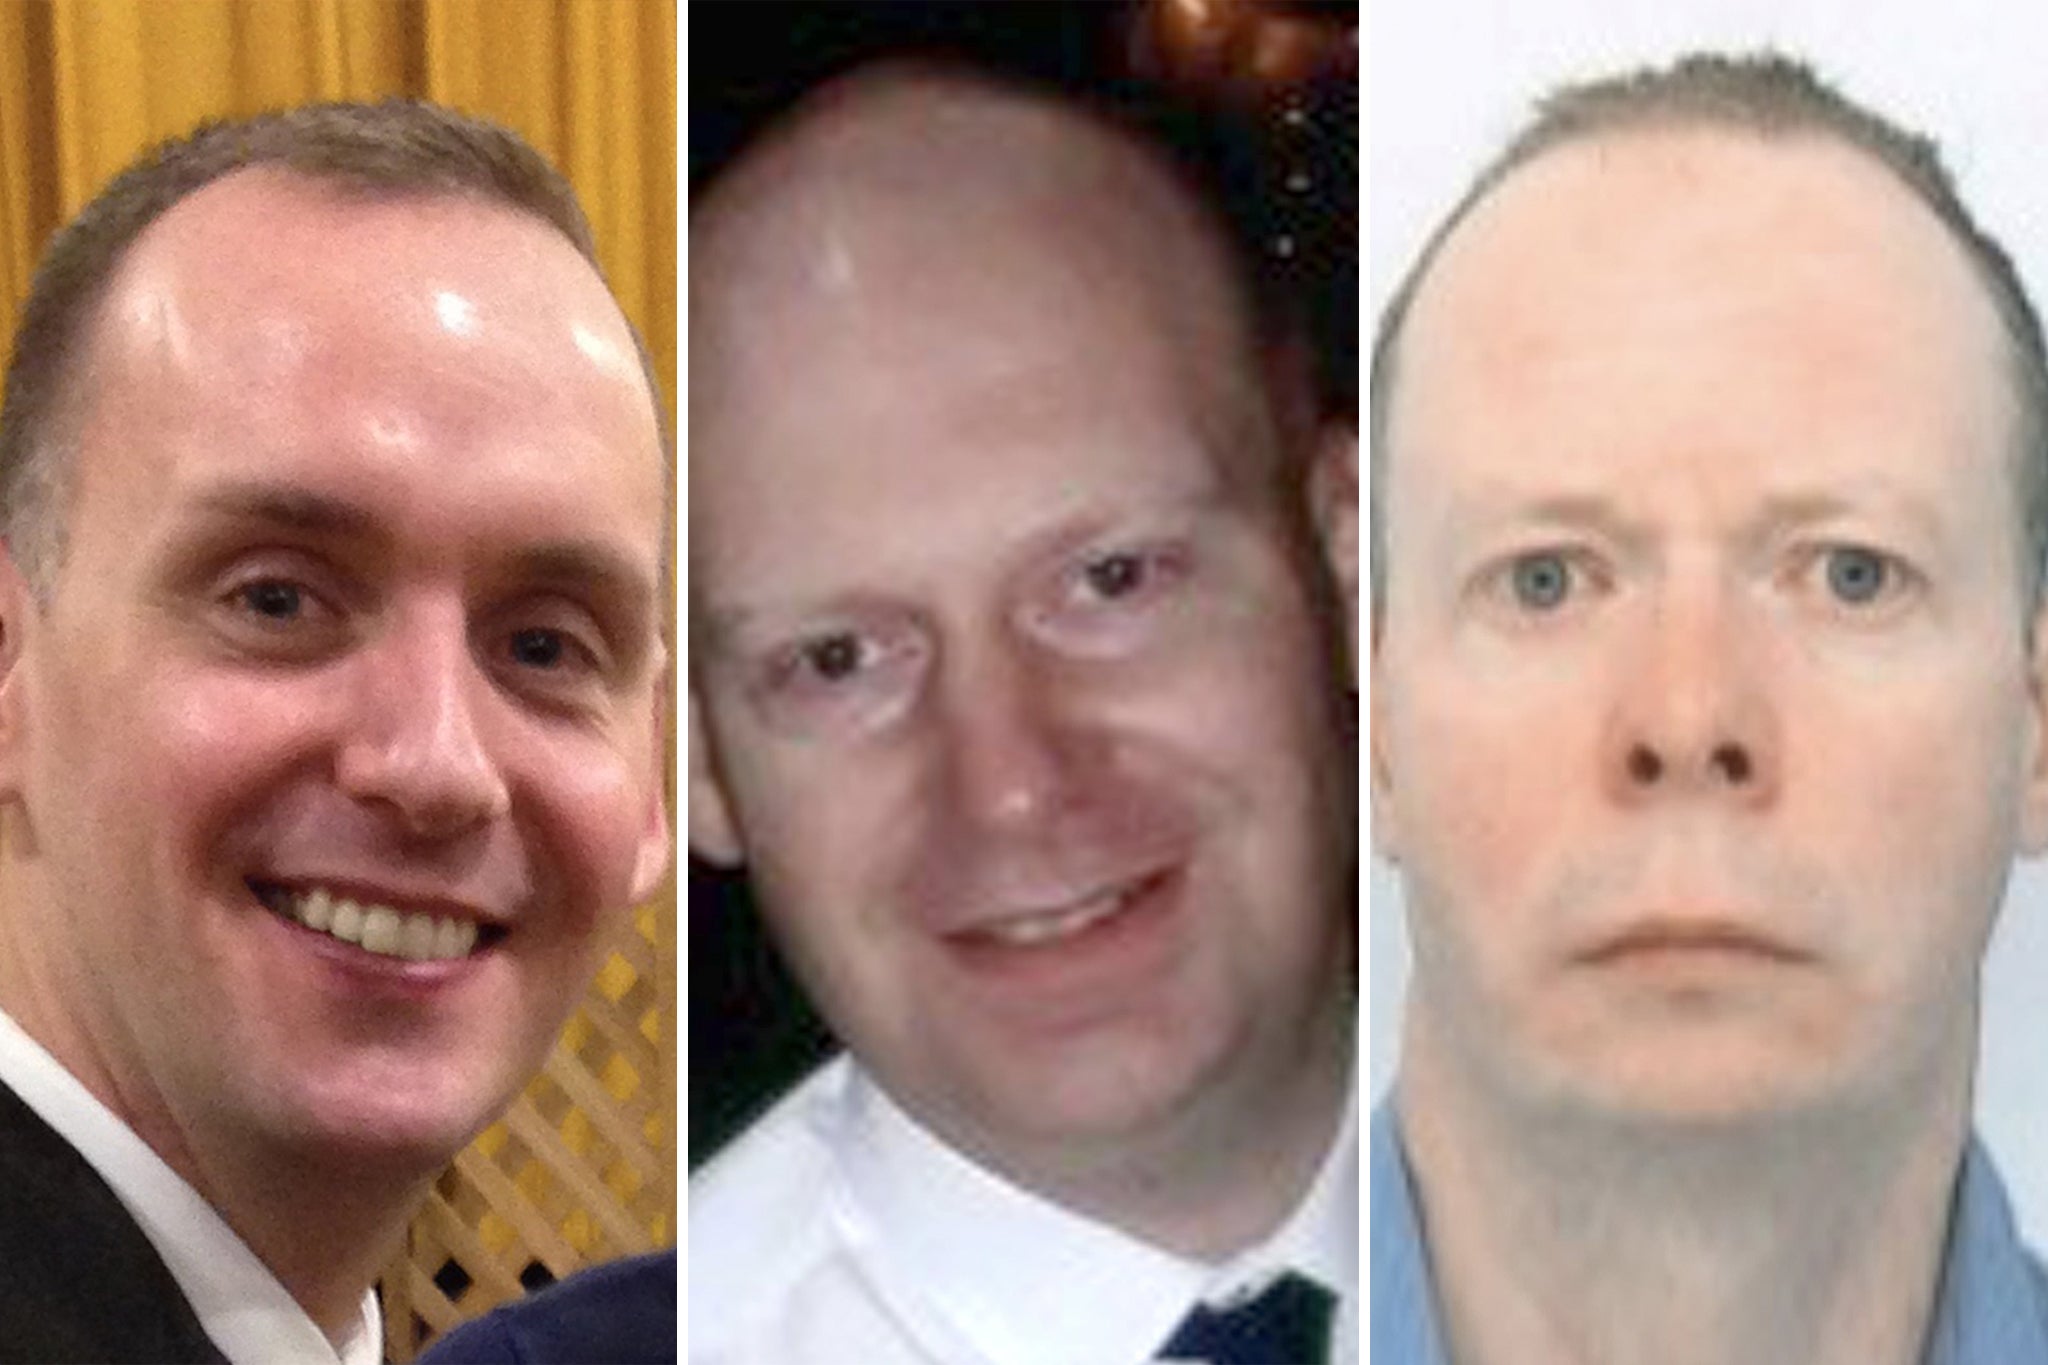 Joe Ritchie-Bennett, James Furlong and David Wails died in the Reading terror attack in 2020